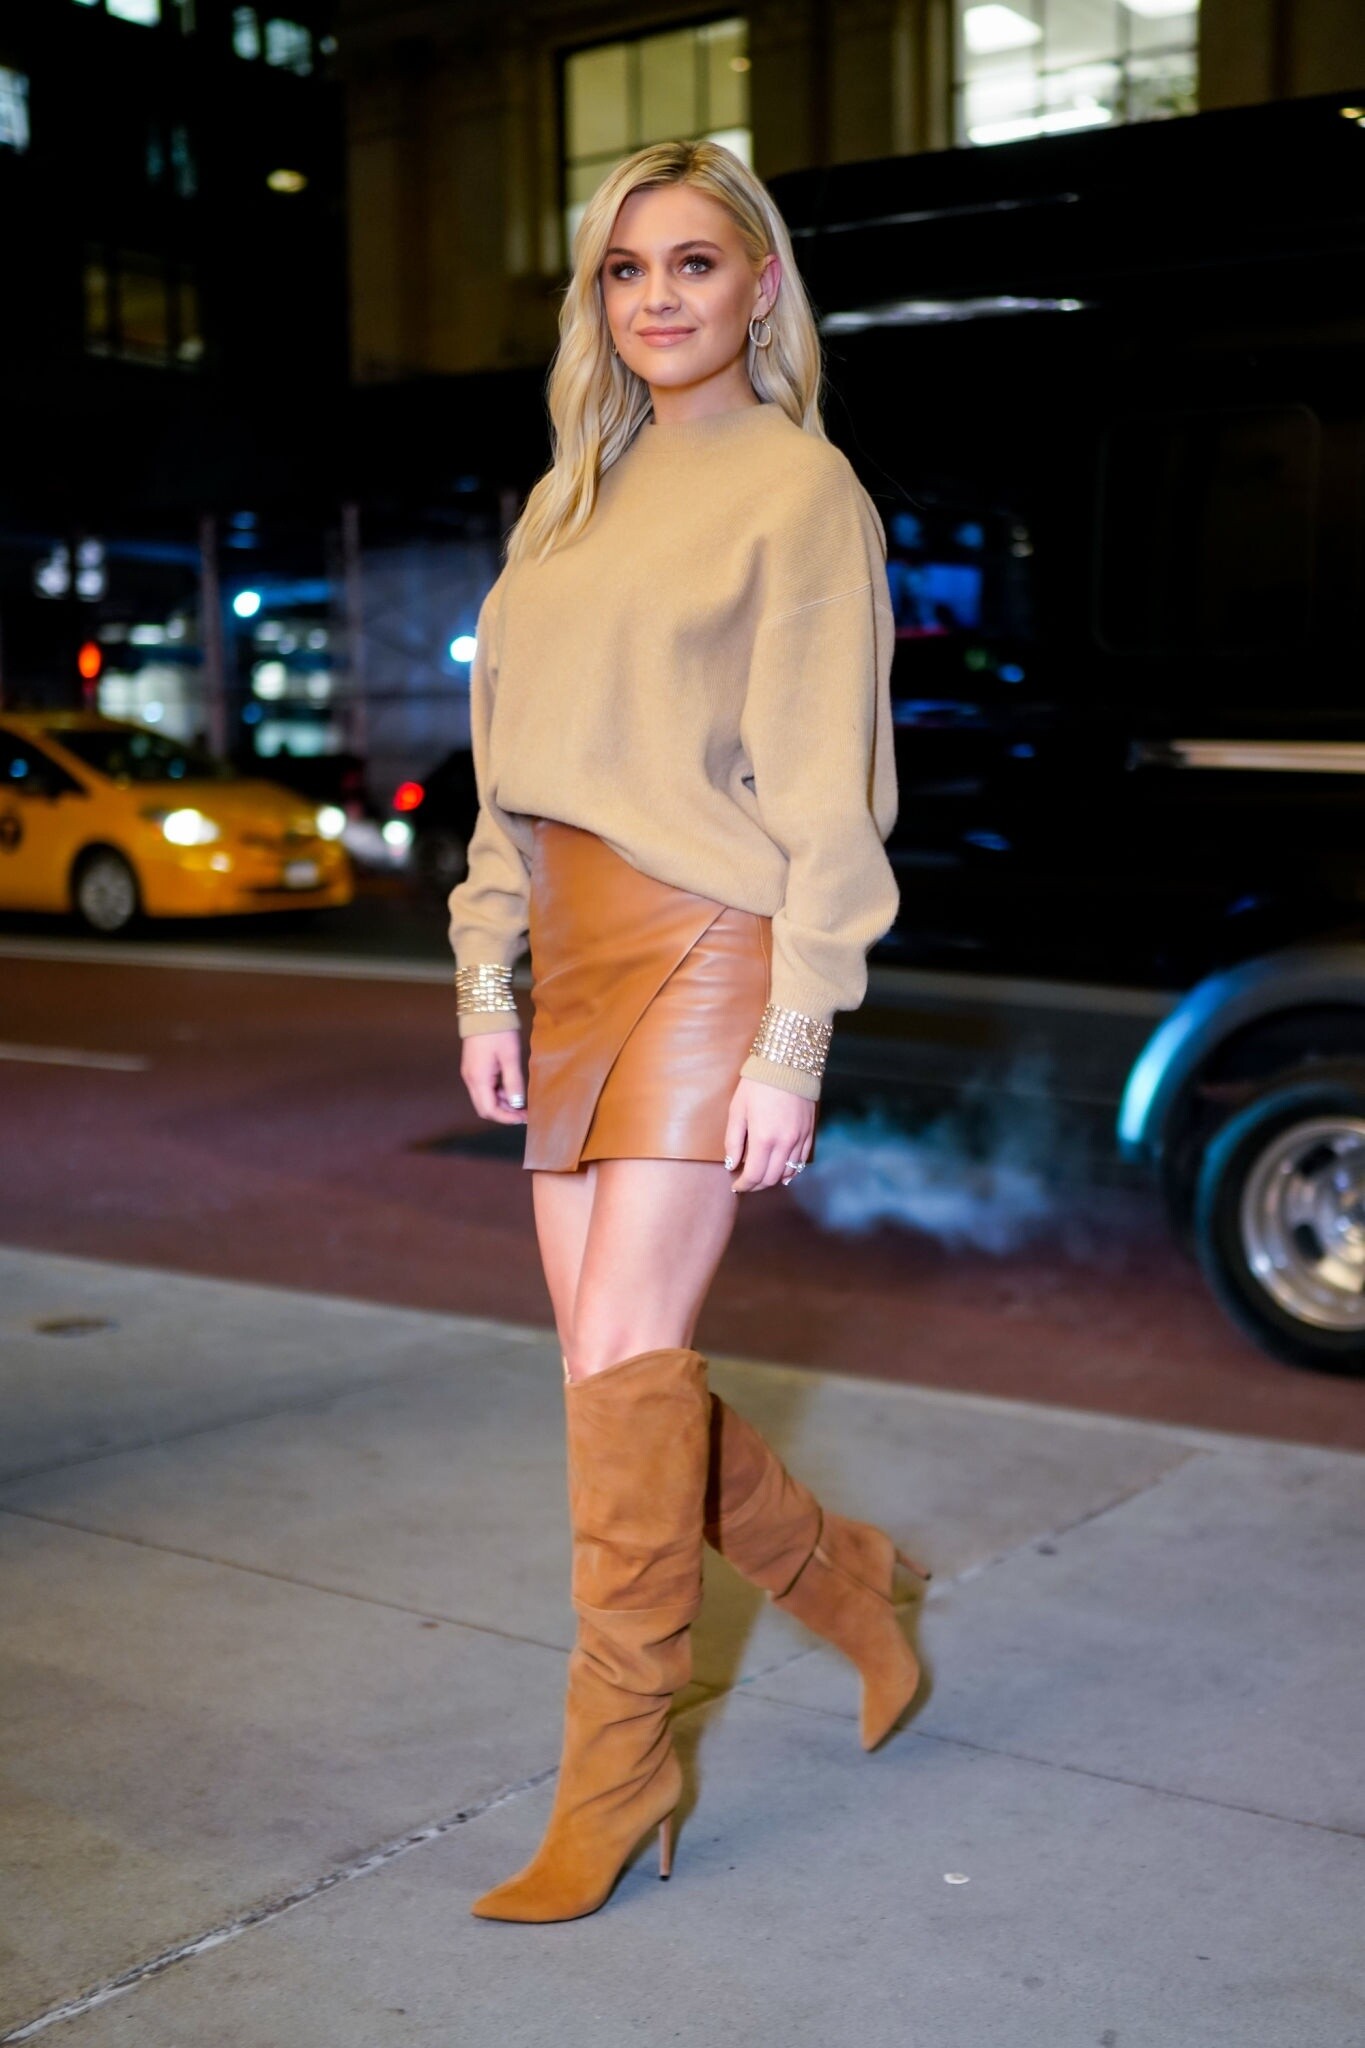 Kelsea Ballerini out in NYC